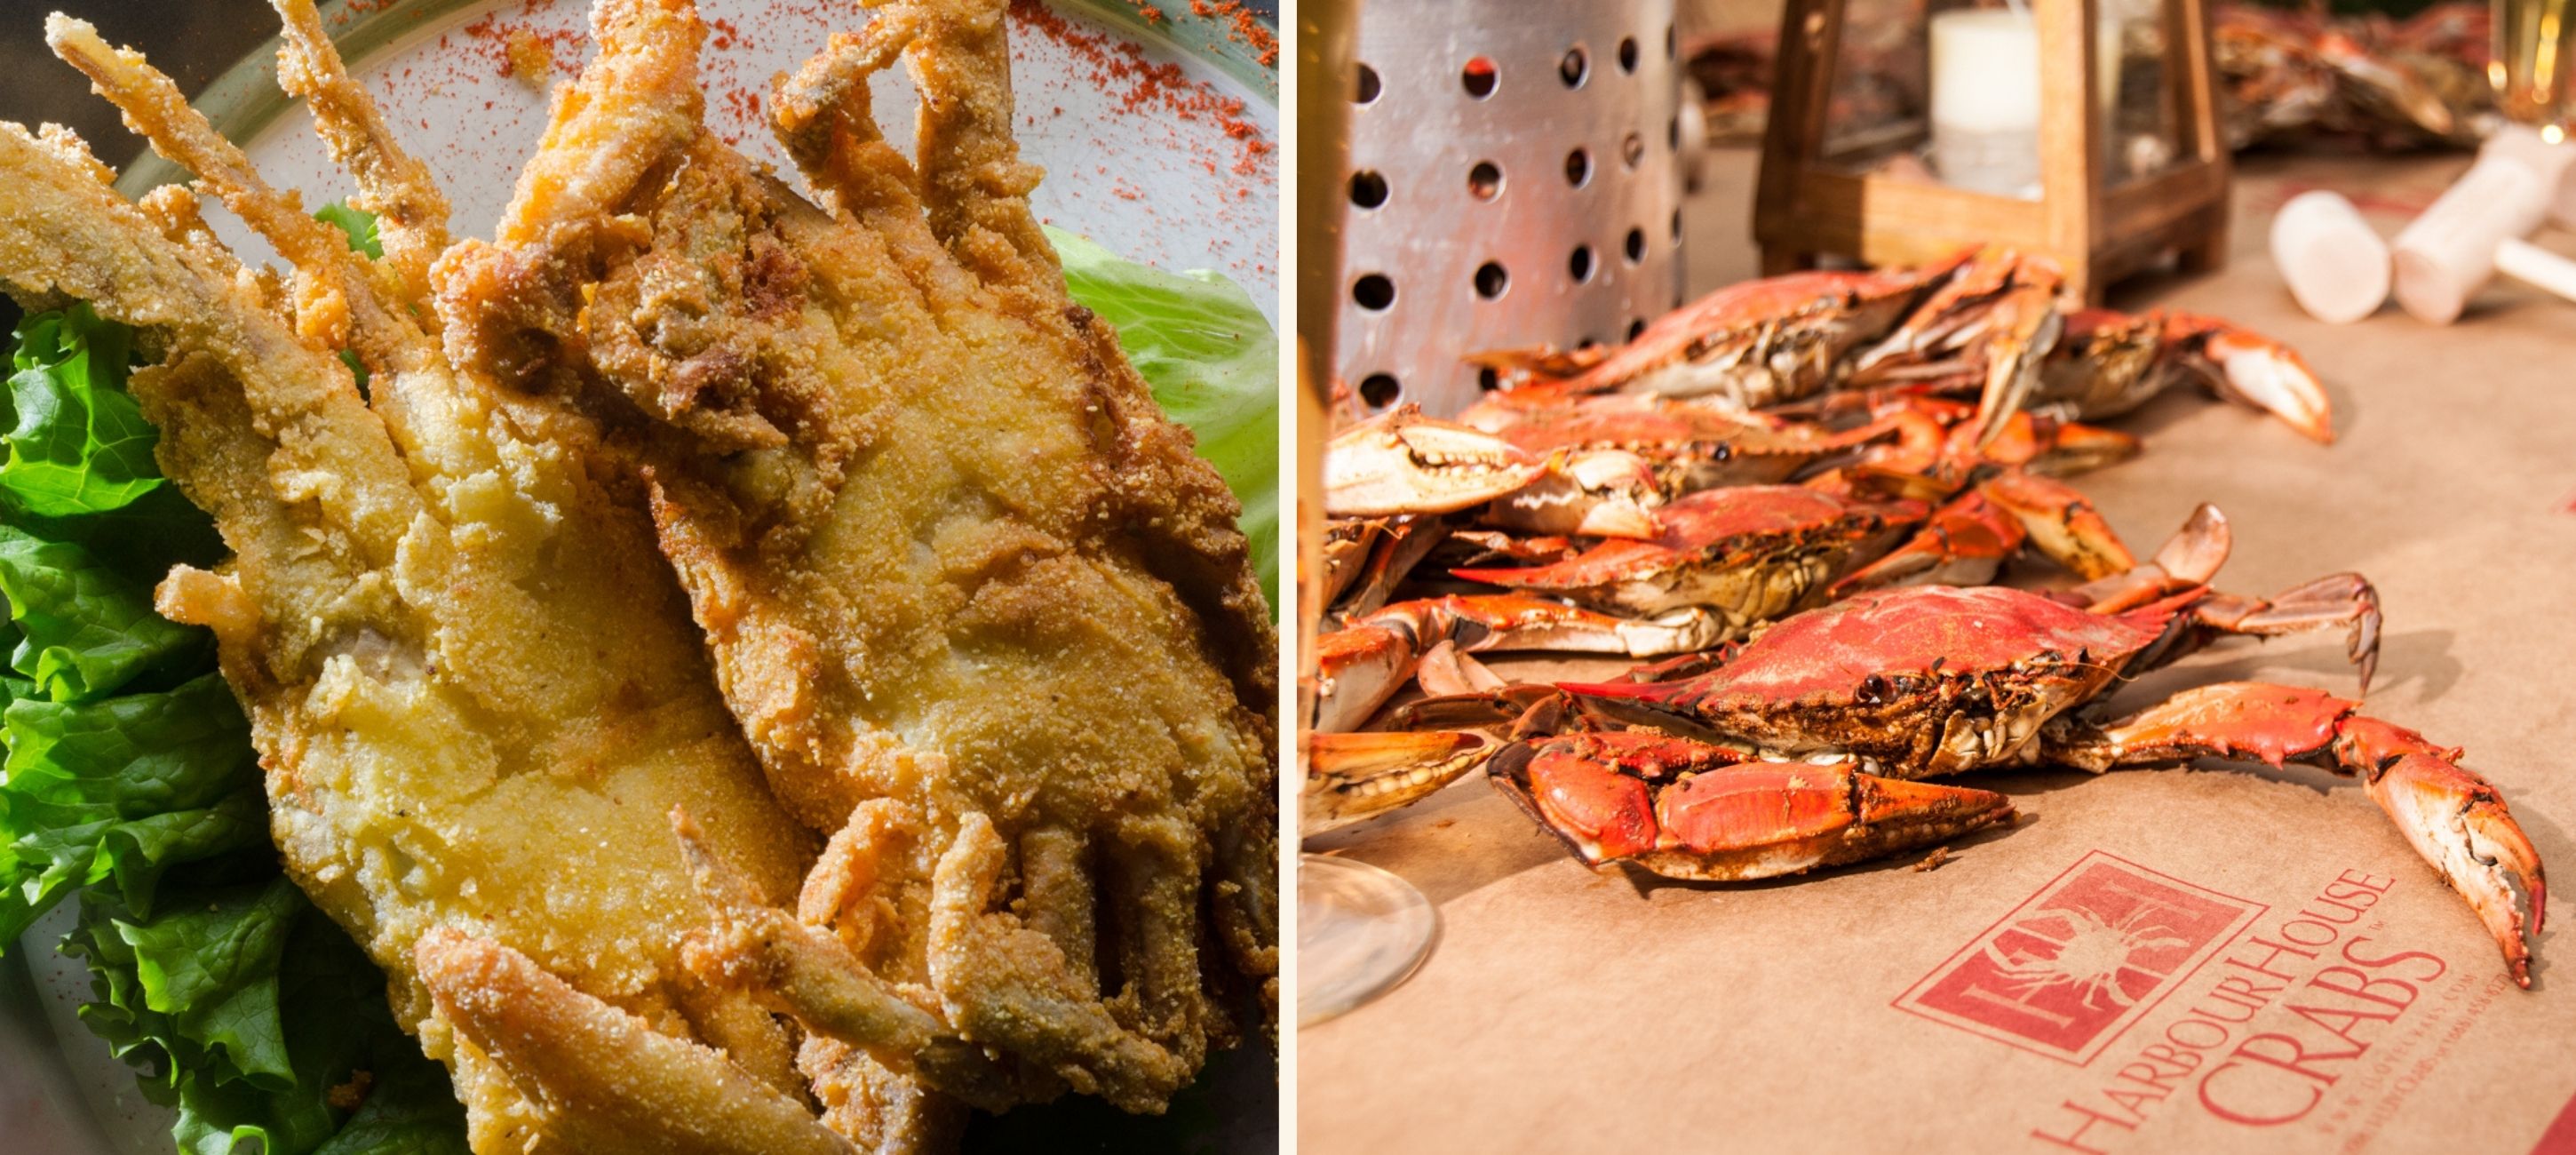 hard shell and soft shell crabs from Harbour House Crabs